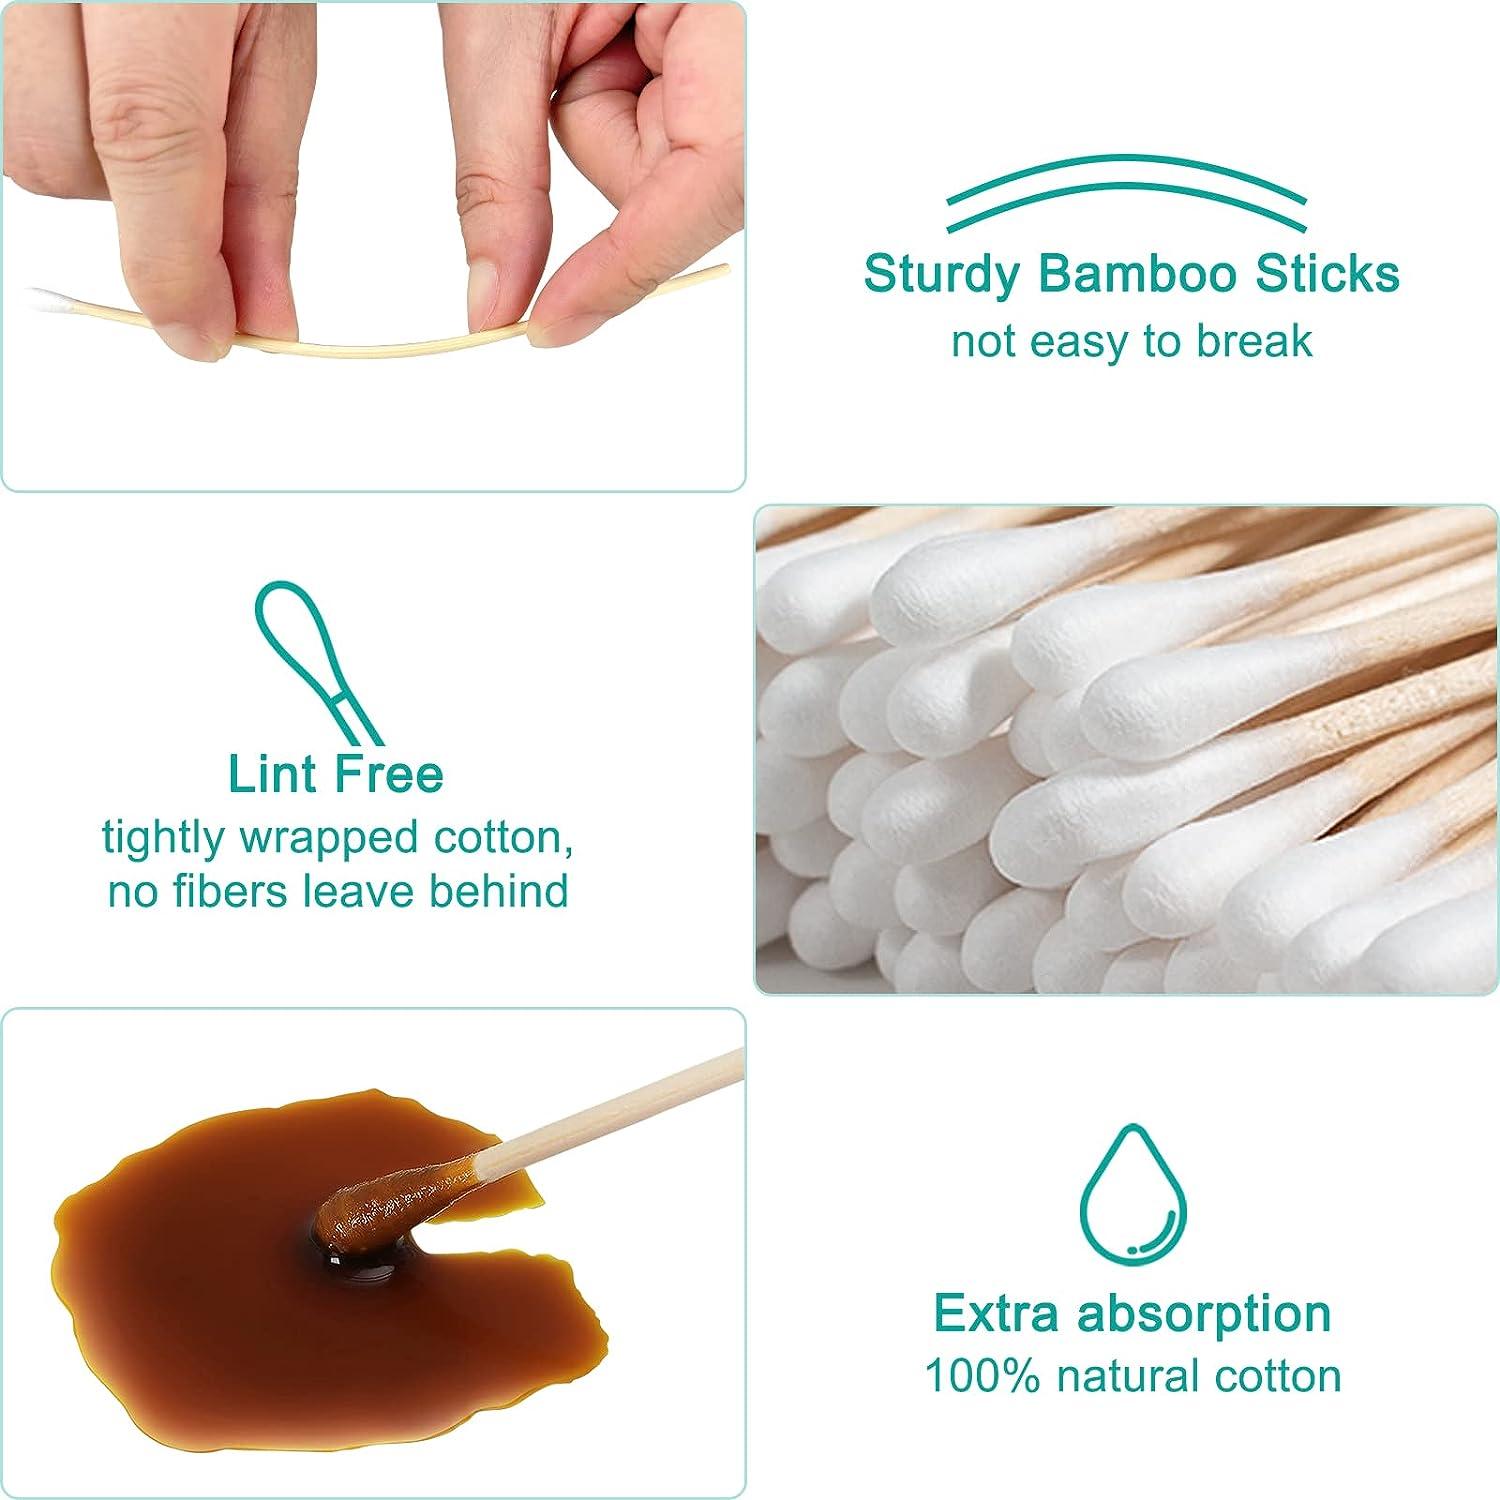  Cotton Swabs - Pointy and Round, Safe and Clean